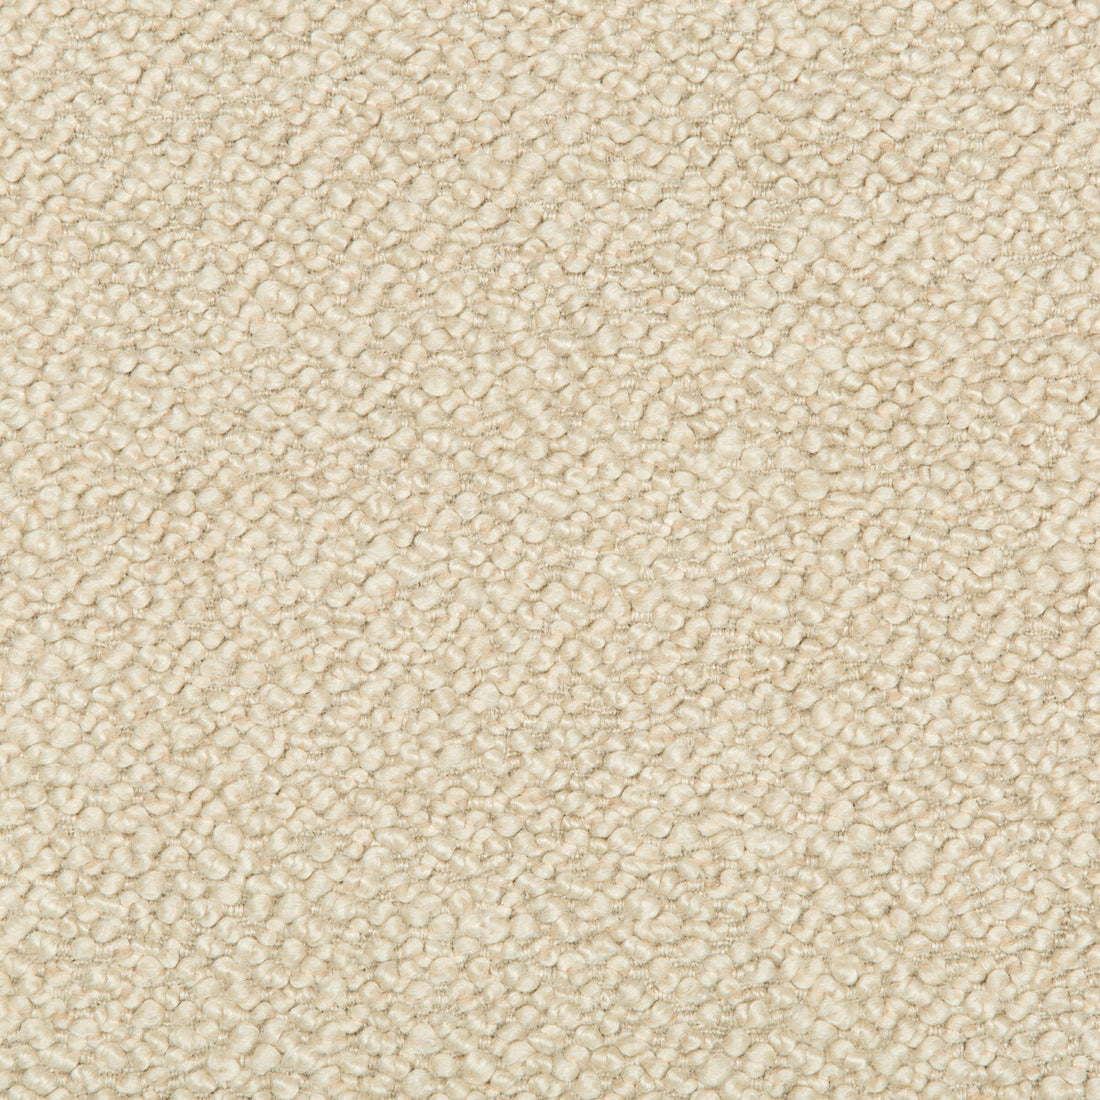 Babbit fabric in cashew color - pattern 34956.16.0 - by Kravet Couture in the Luxury Textures II collection